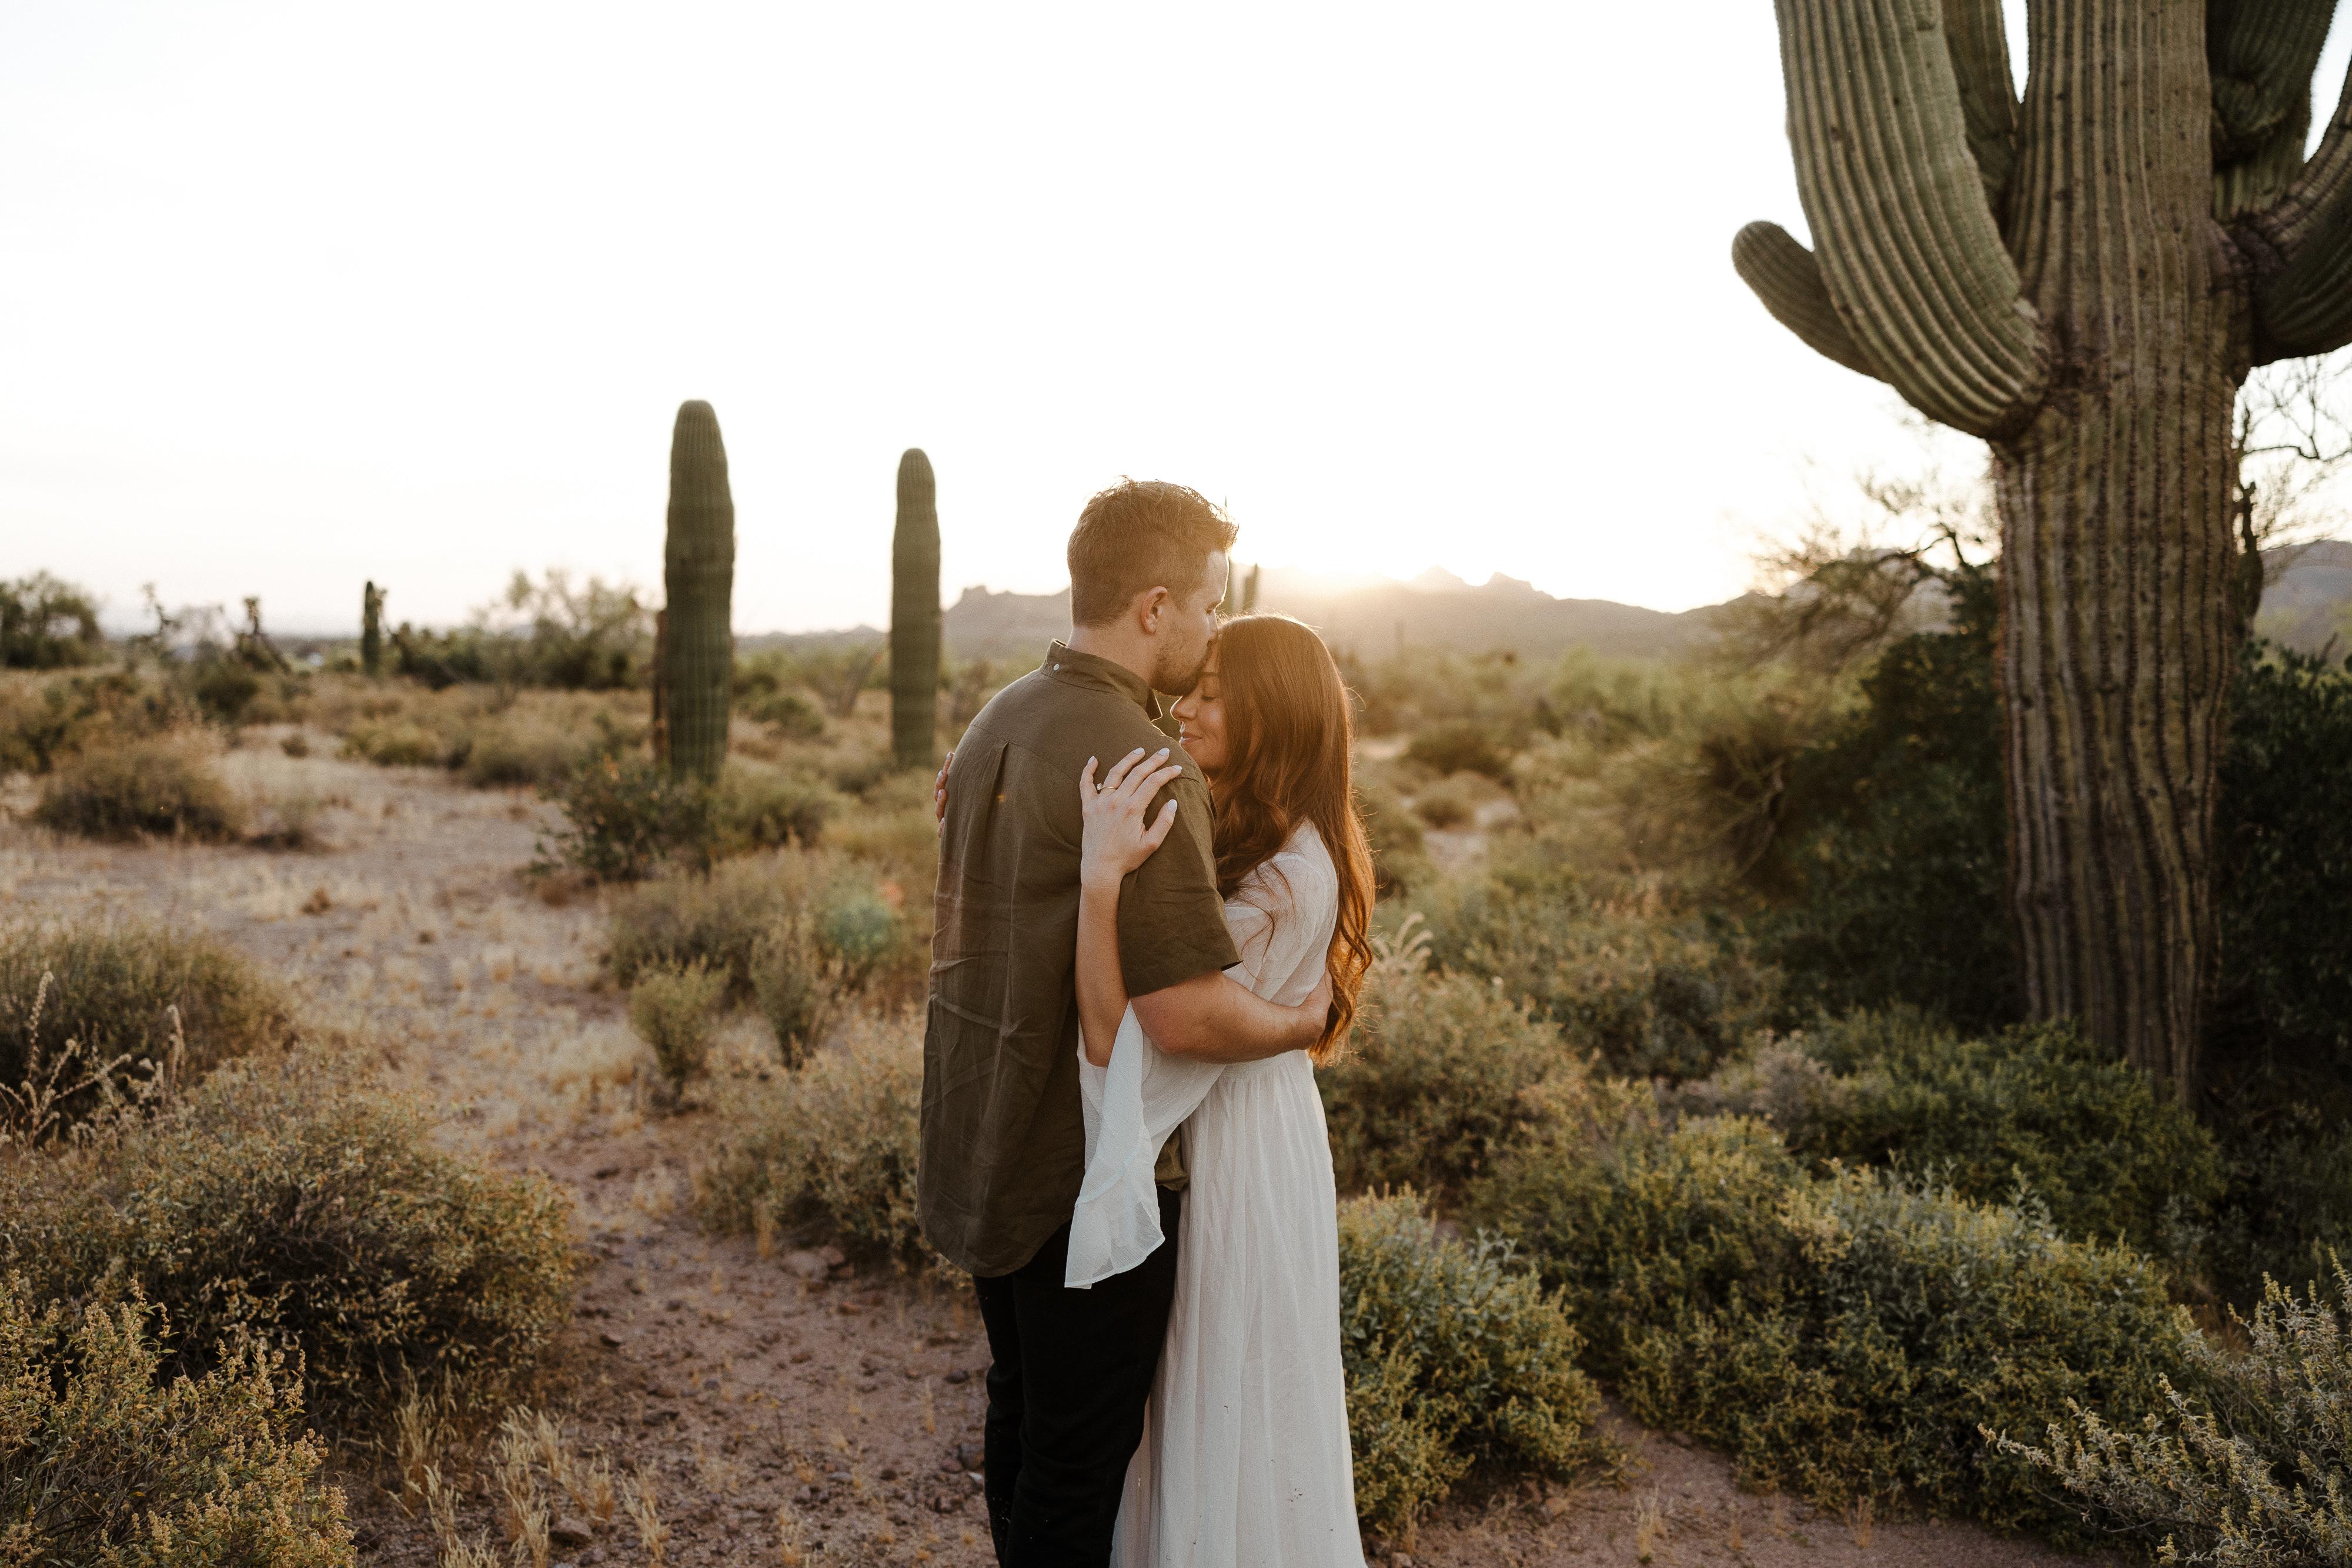 The Wedding Website of Alicia Garcia and Sam Hutchison